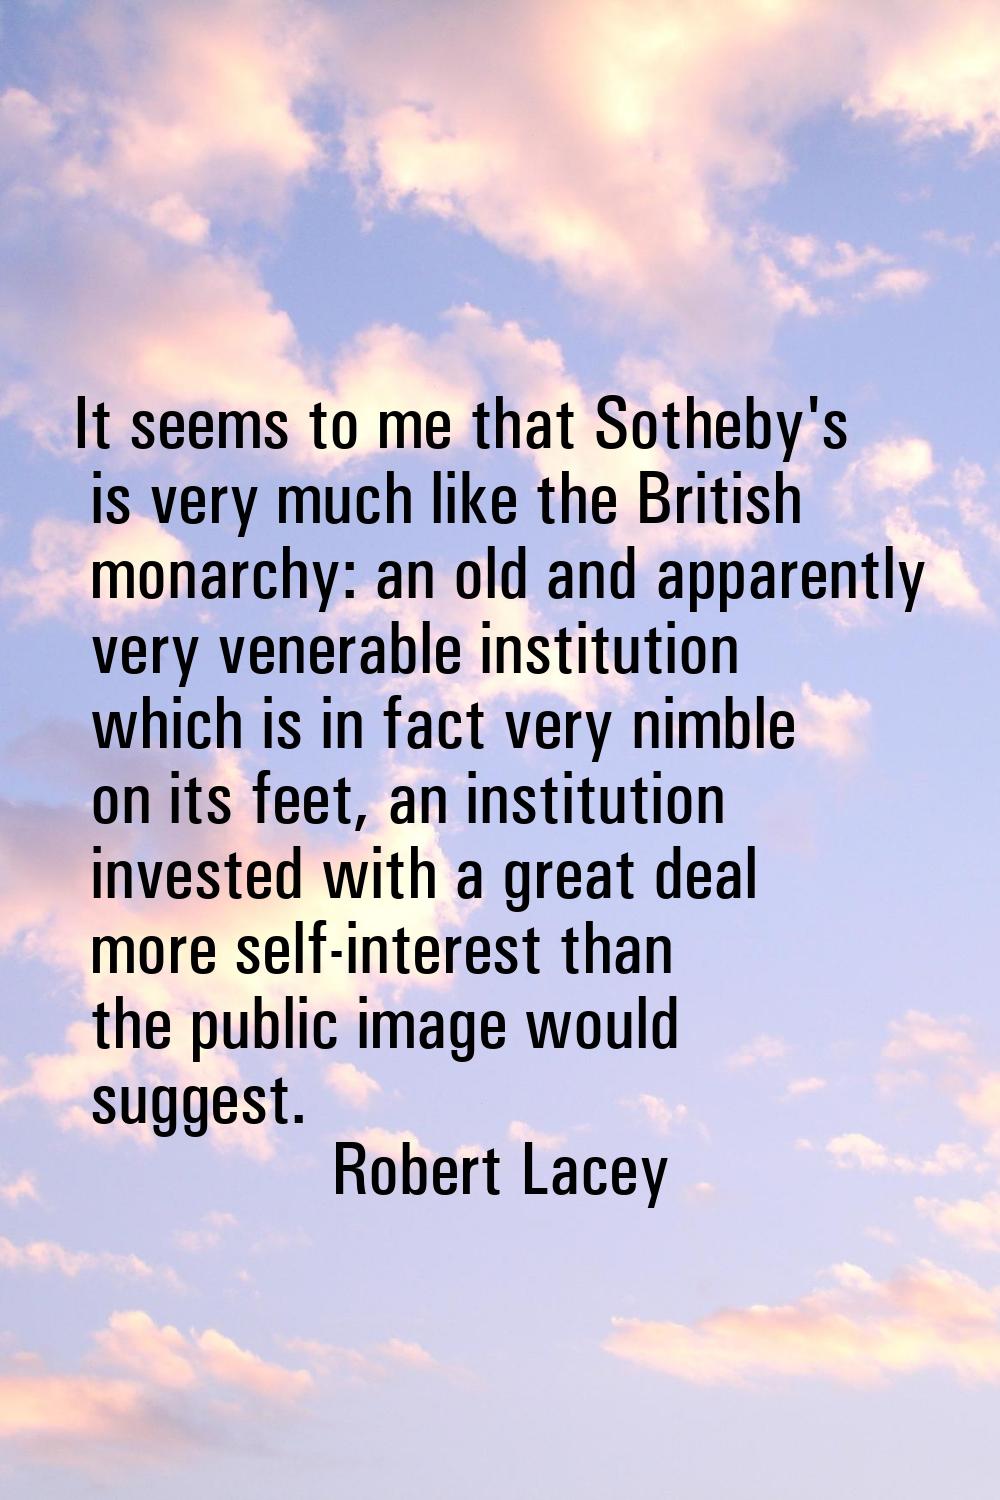 It seems to me that Sotheby's is very much like the British monarchy: an old and apparently very ve